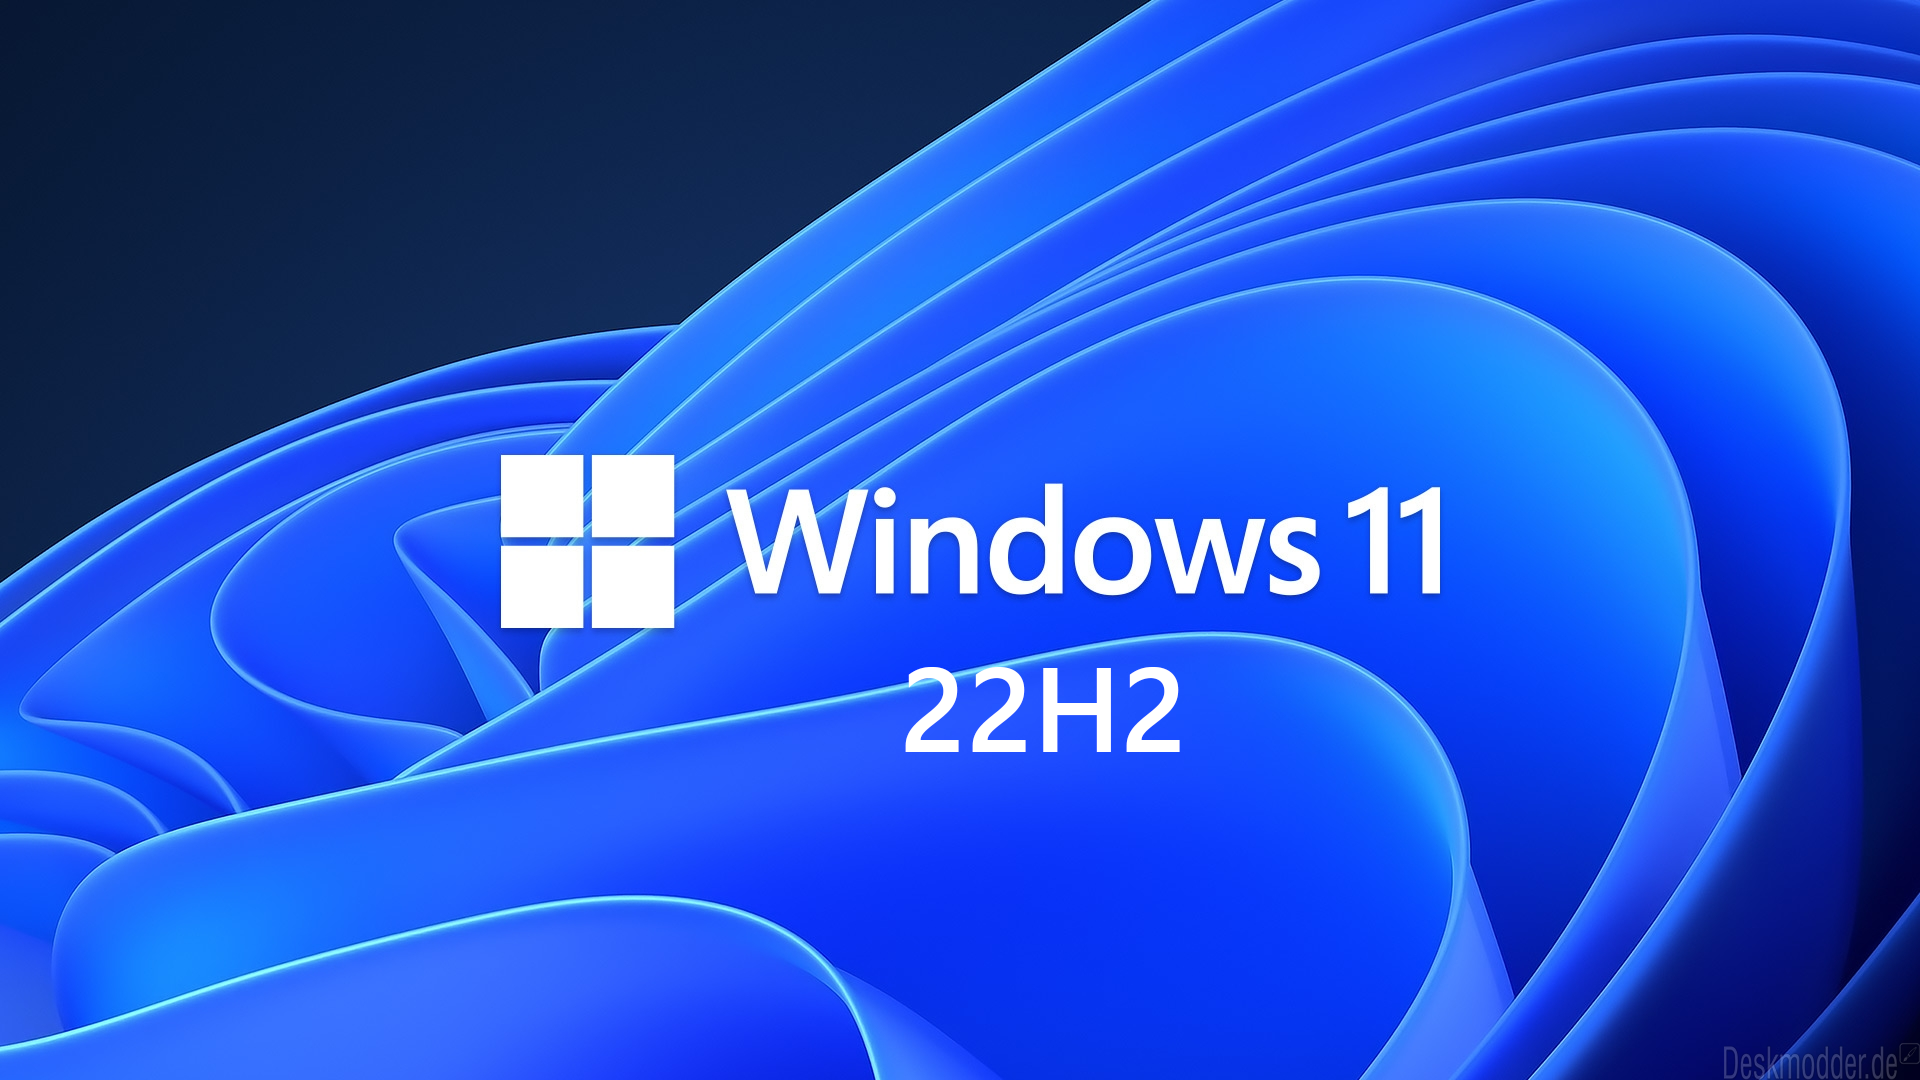 Windows 11 22H2 “RTM” is scheduled to be released at the end of May (24/05). [Update]